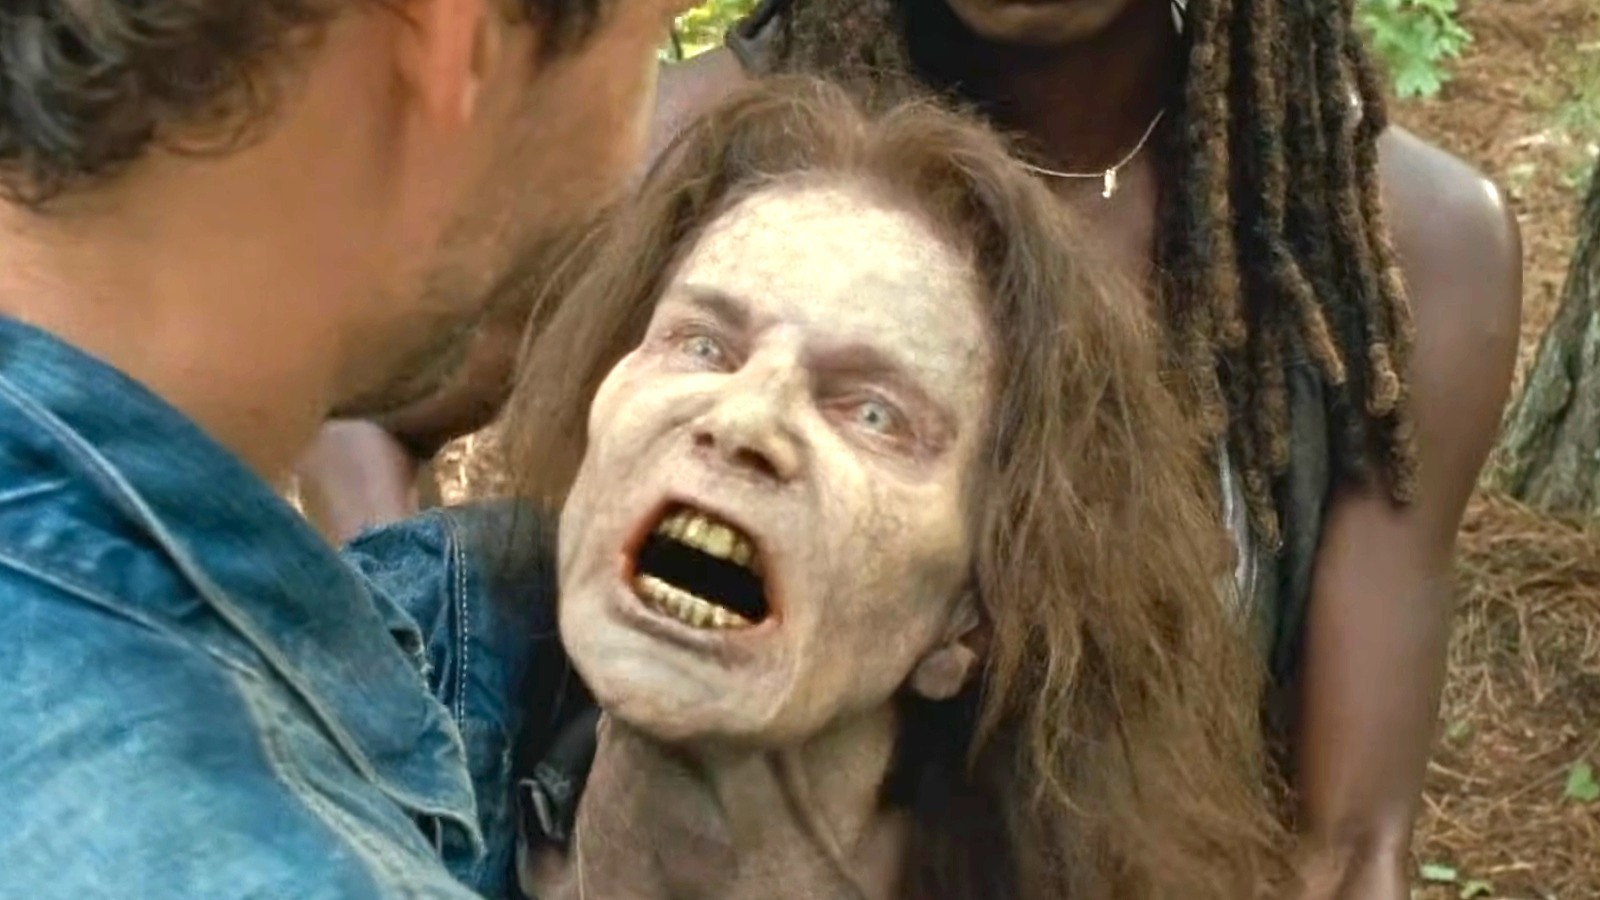 The Walking Dead Zombie Extras Have Tiered Makeup Processes Behind The Scenes